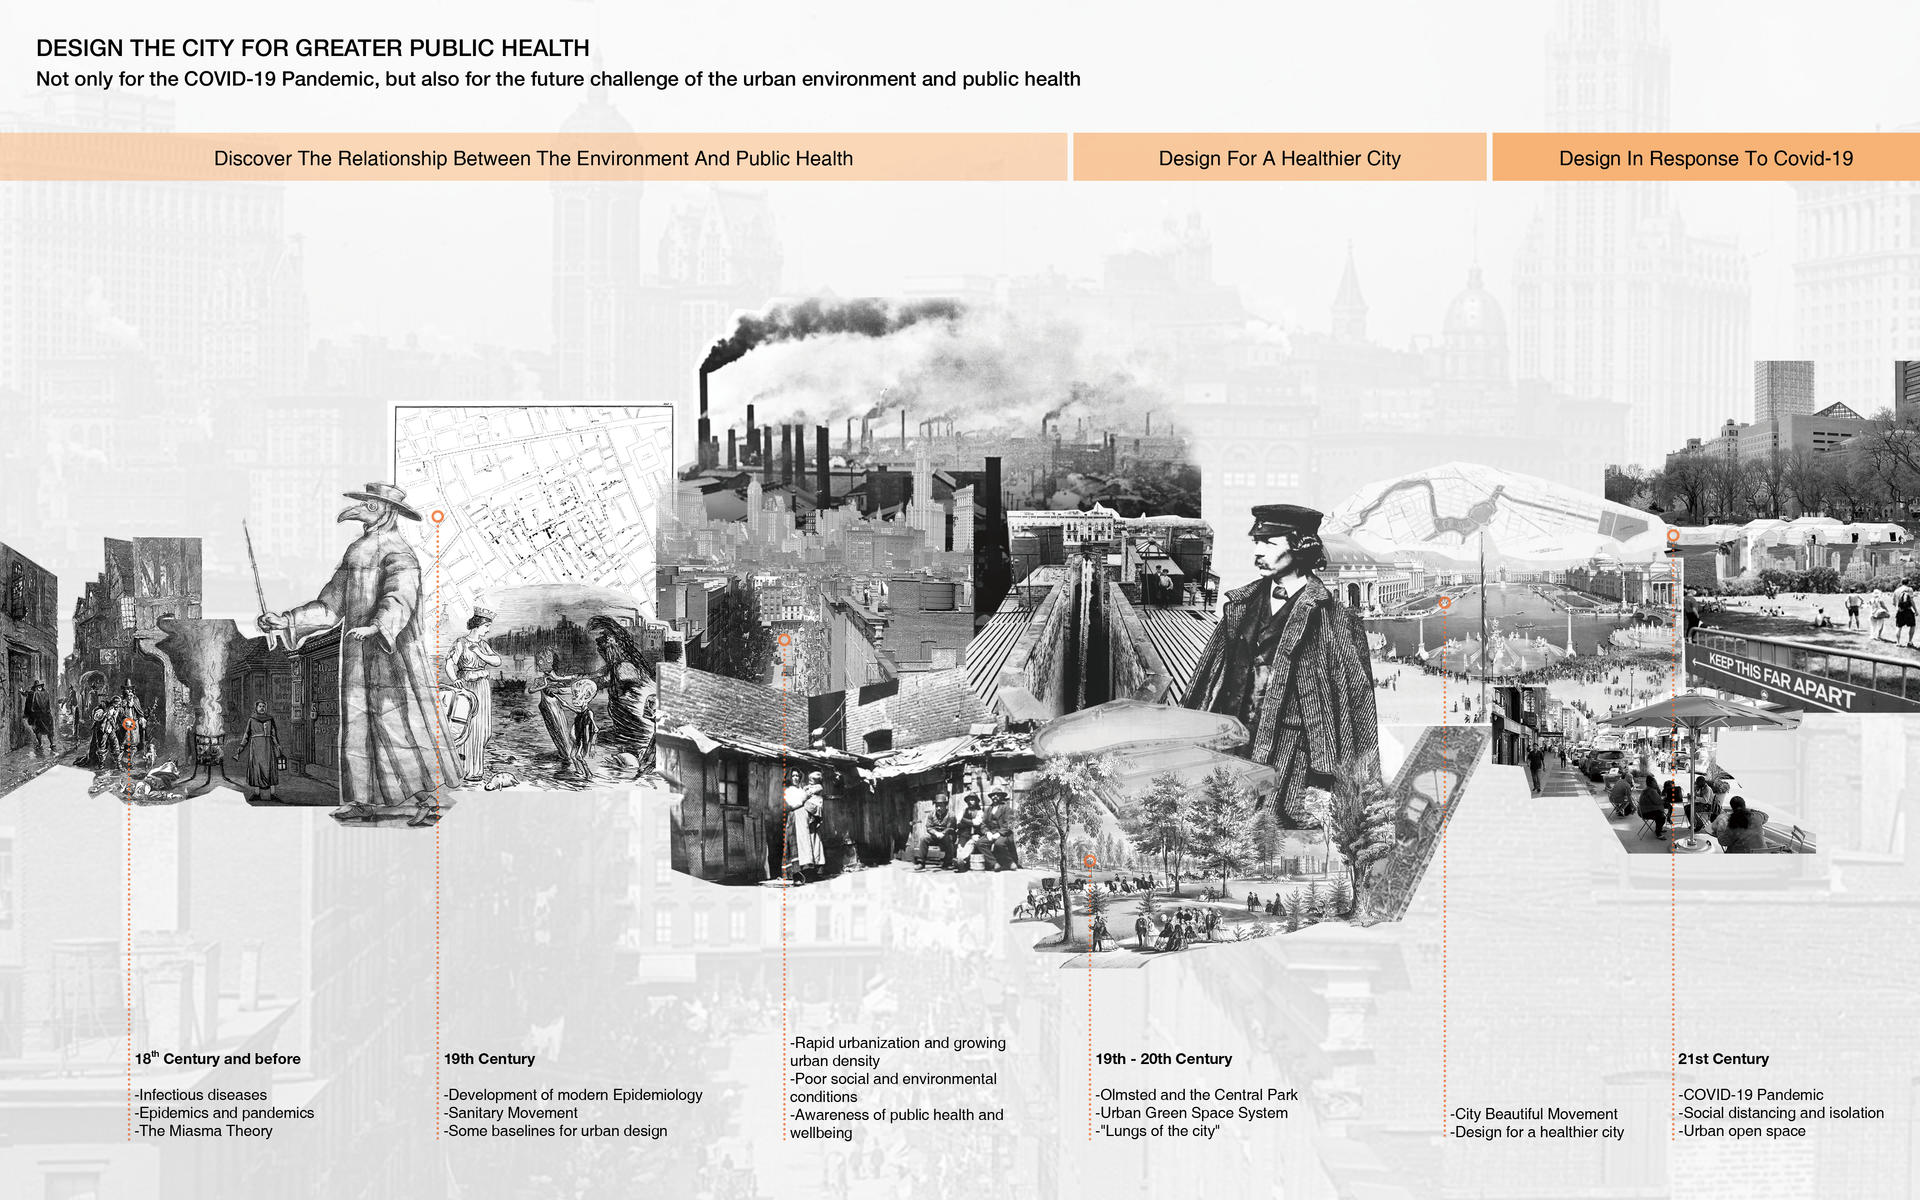 A timeline collage includes paintings, historical maps, and photos to show the development of urban space design in response to public health.  